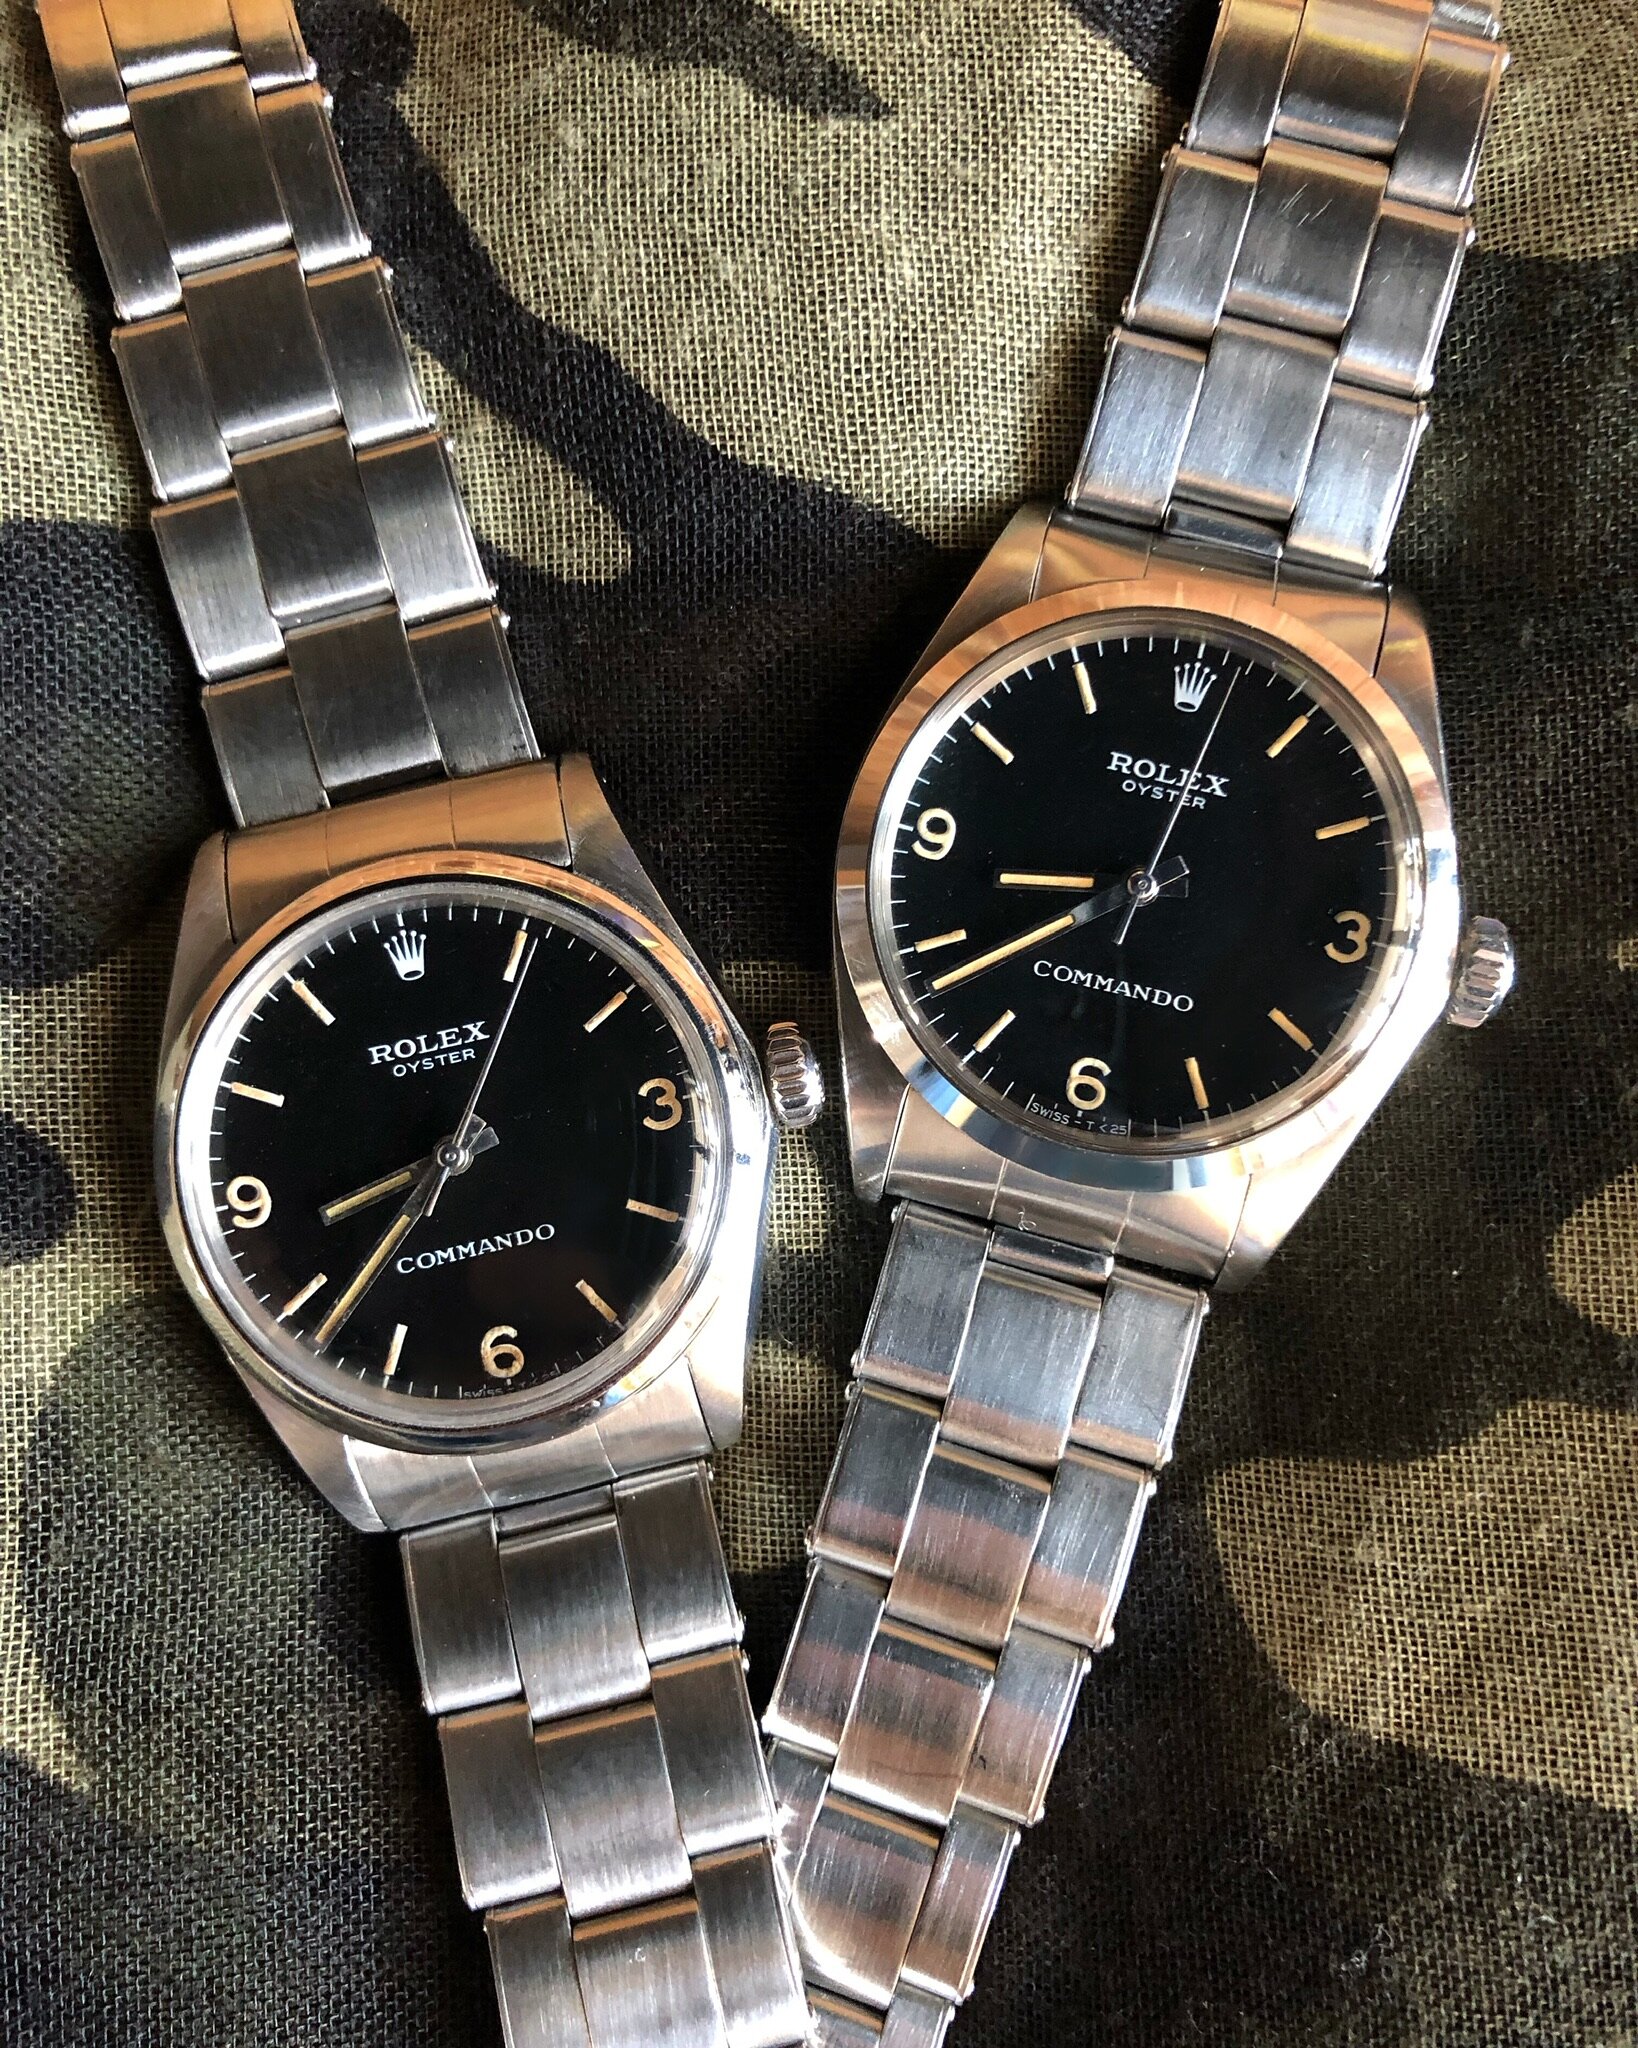 What to know about the Rolex Commando 